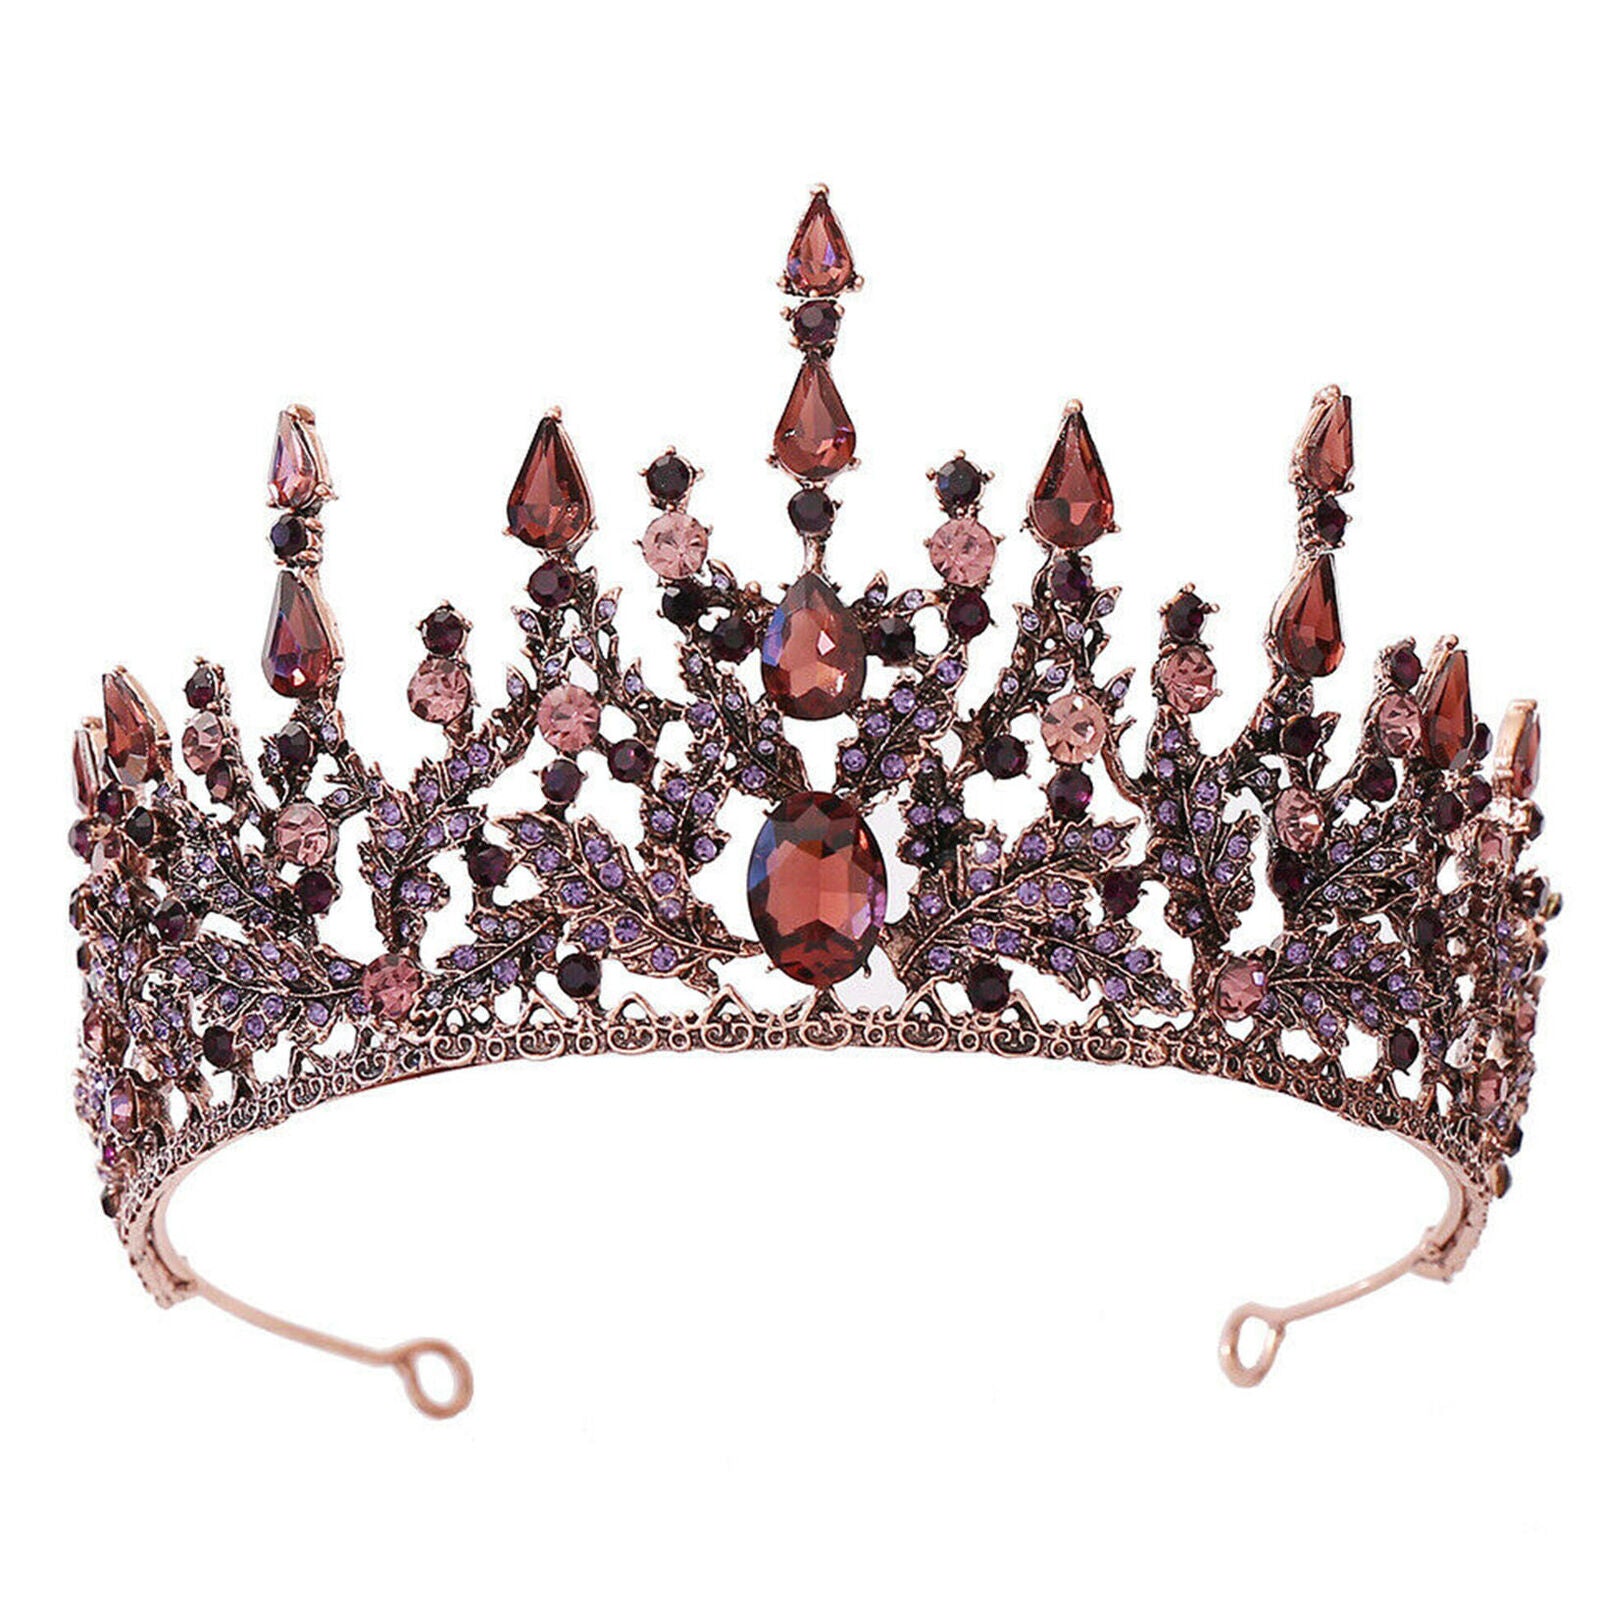 8.2cm High Luxury Crystal Wedding Bridal Party Pageant Prom Tiara Crown 6 Colors